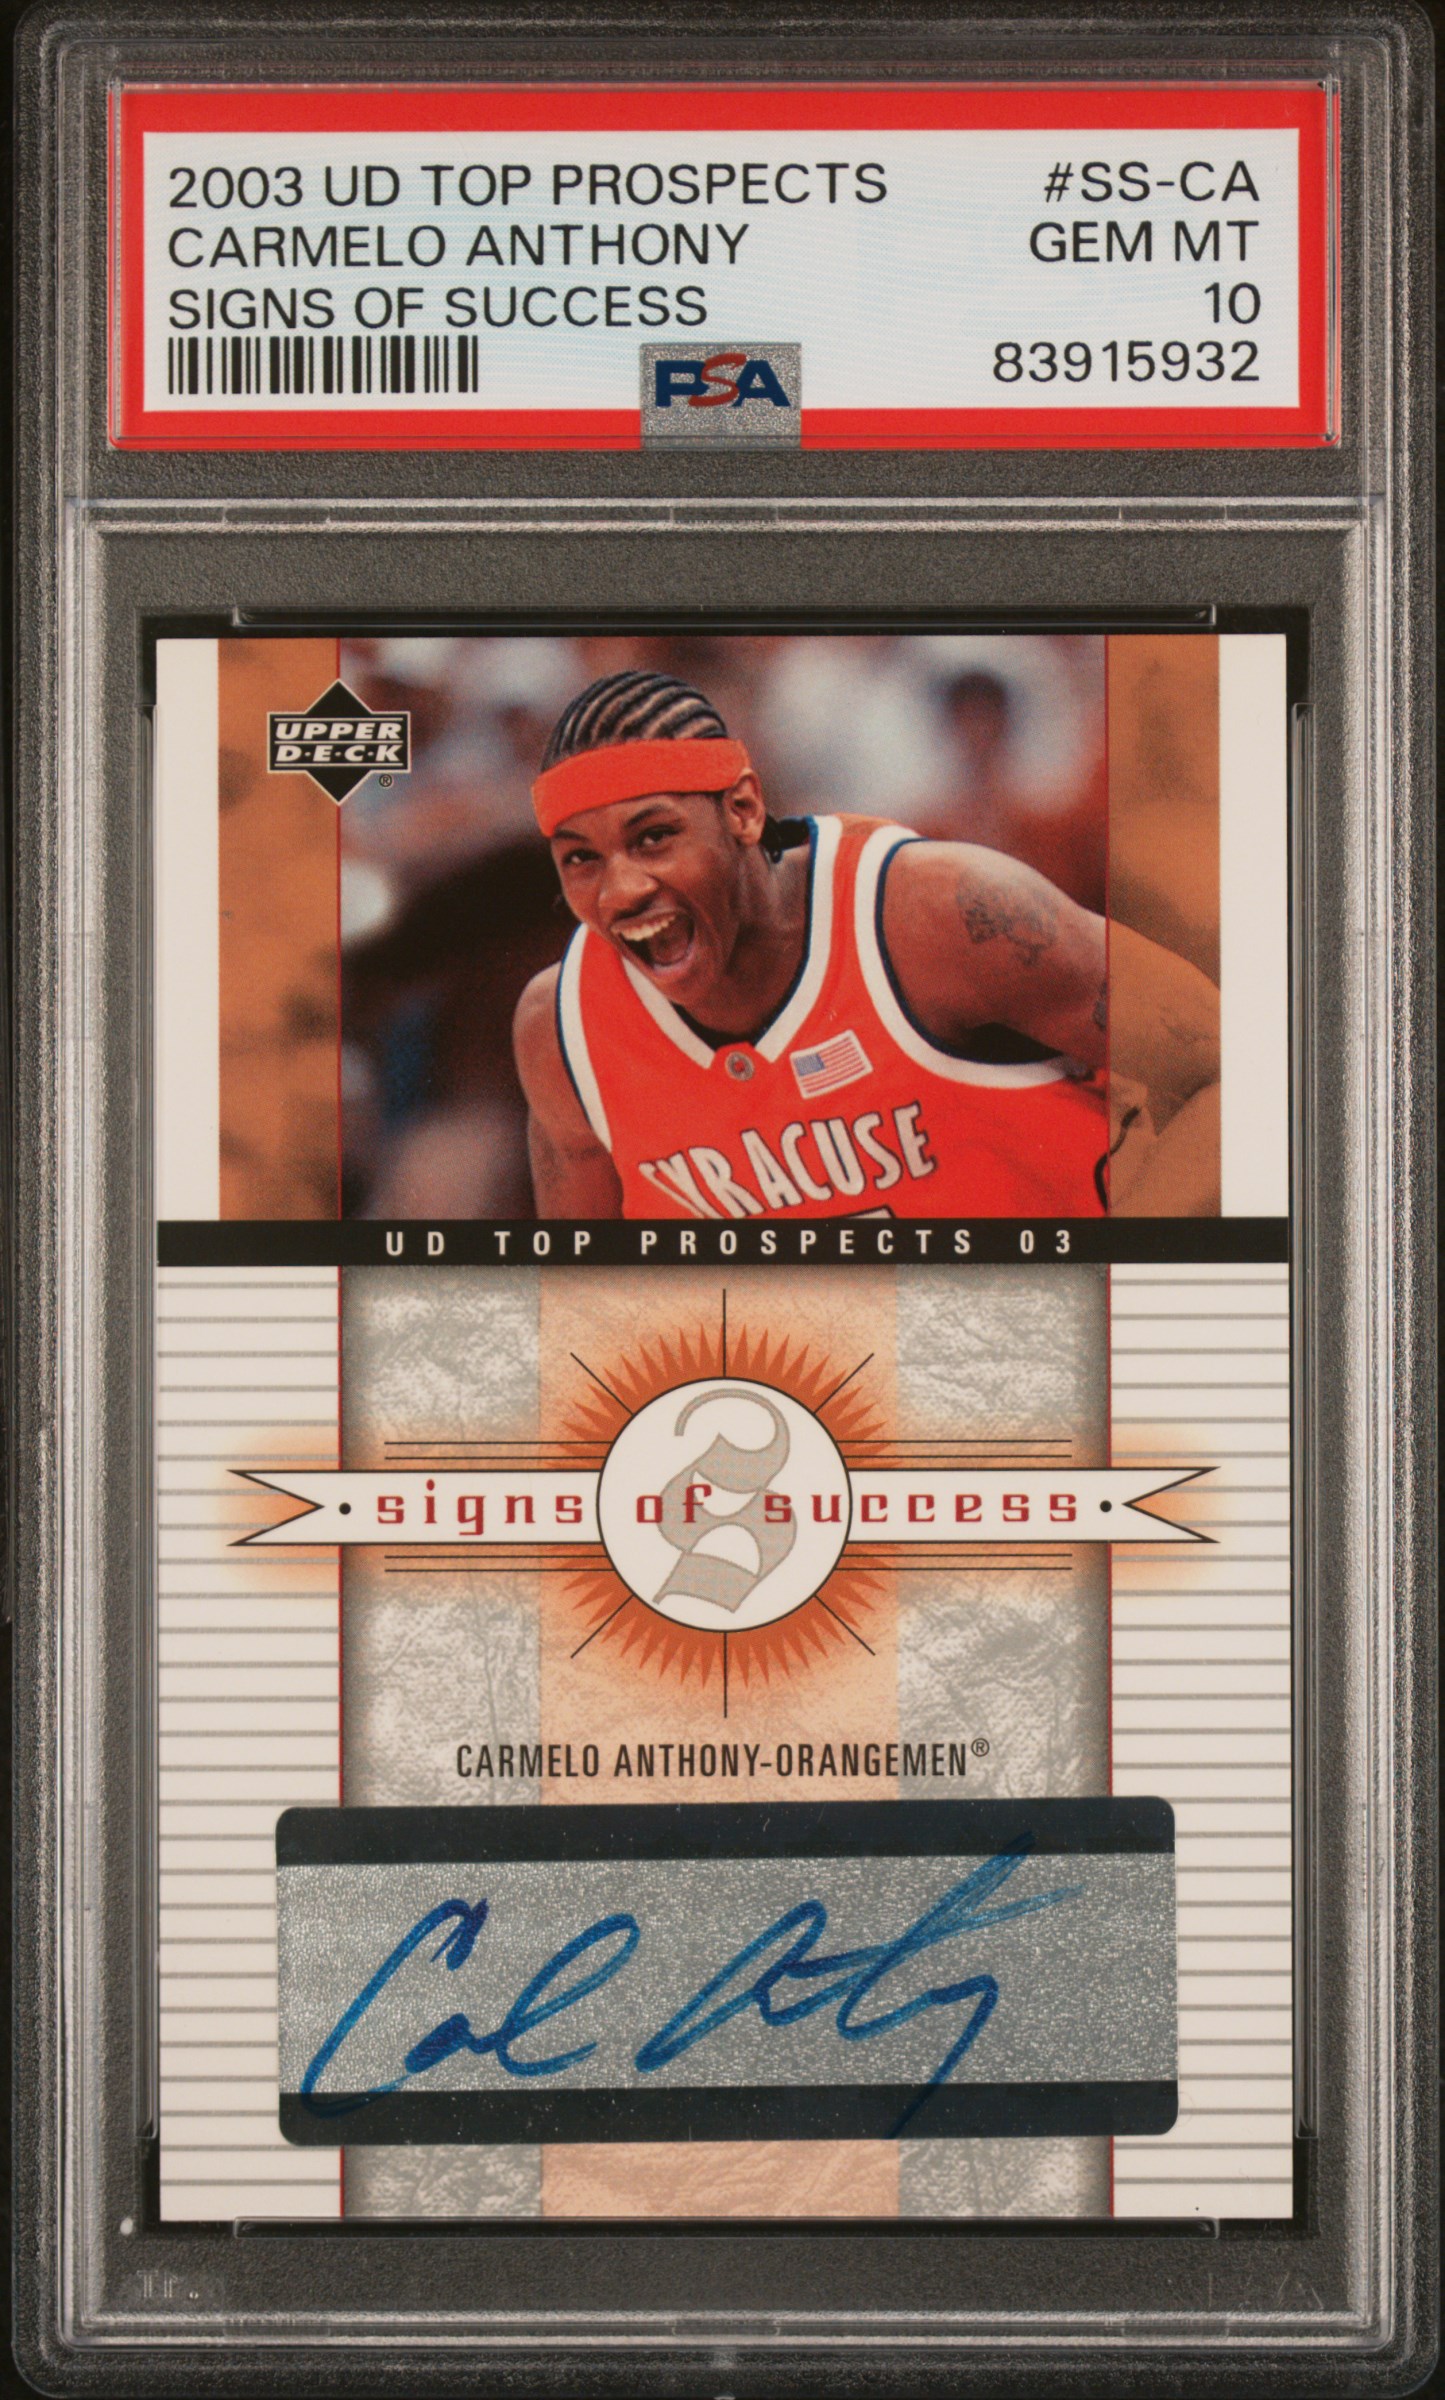 2003 Upper Deck Top Prospects Signs Of Success Signs Of Success Ss-Ca Carmelo Anthony Rookie Card – PSA GEM MT 10